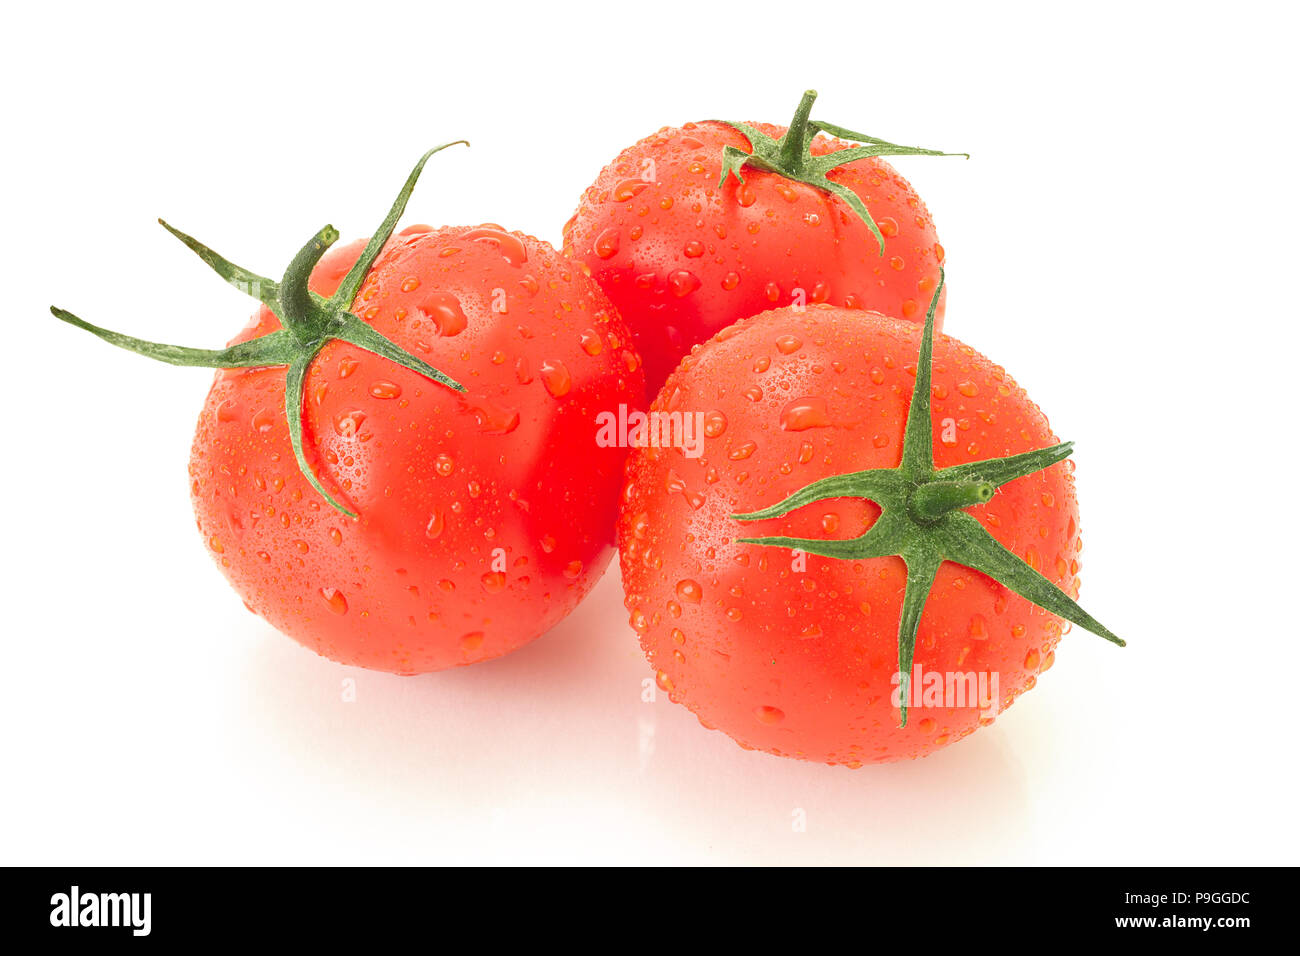 ripe tomato with green leaves Stock Photo